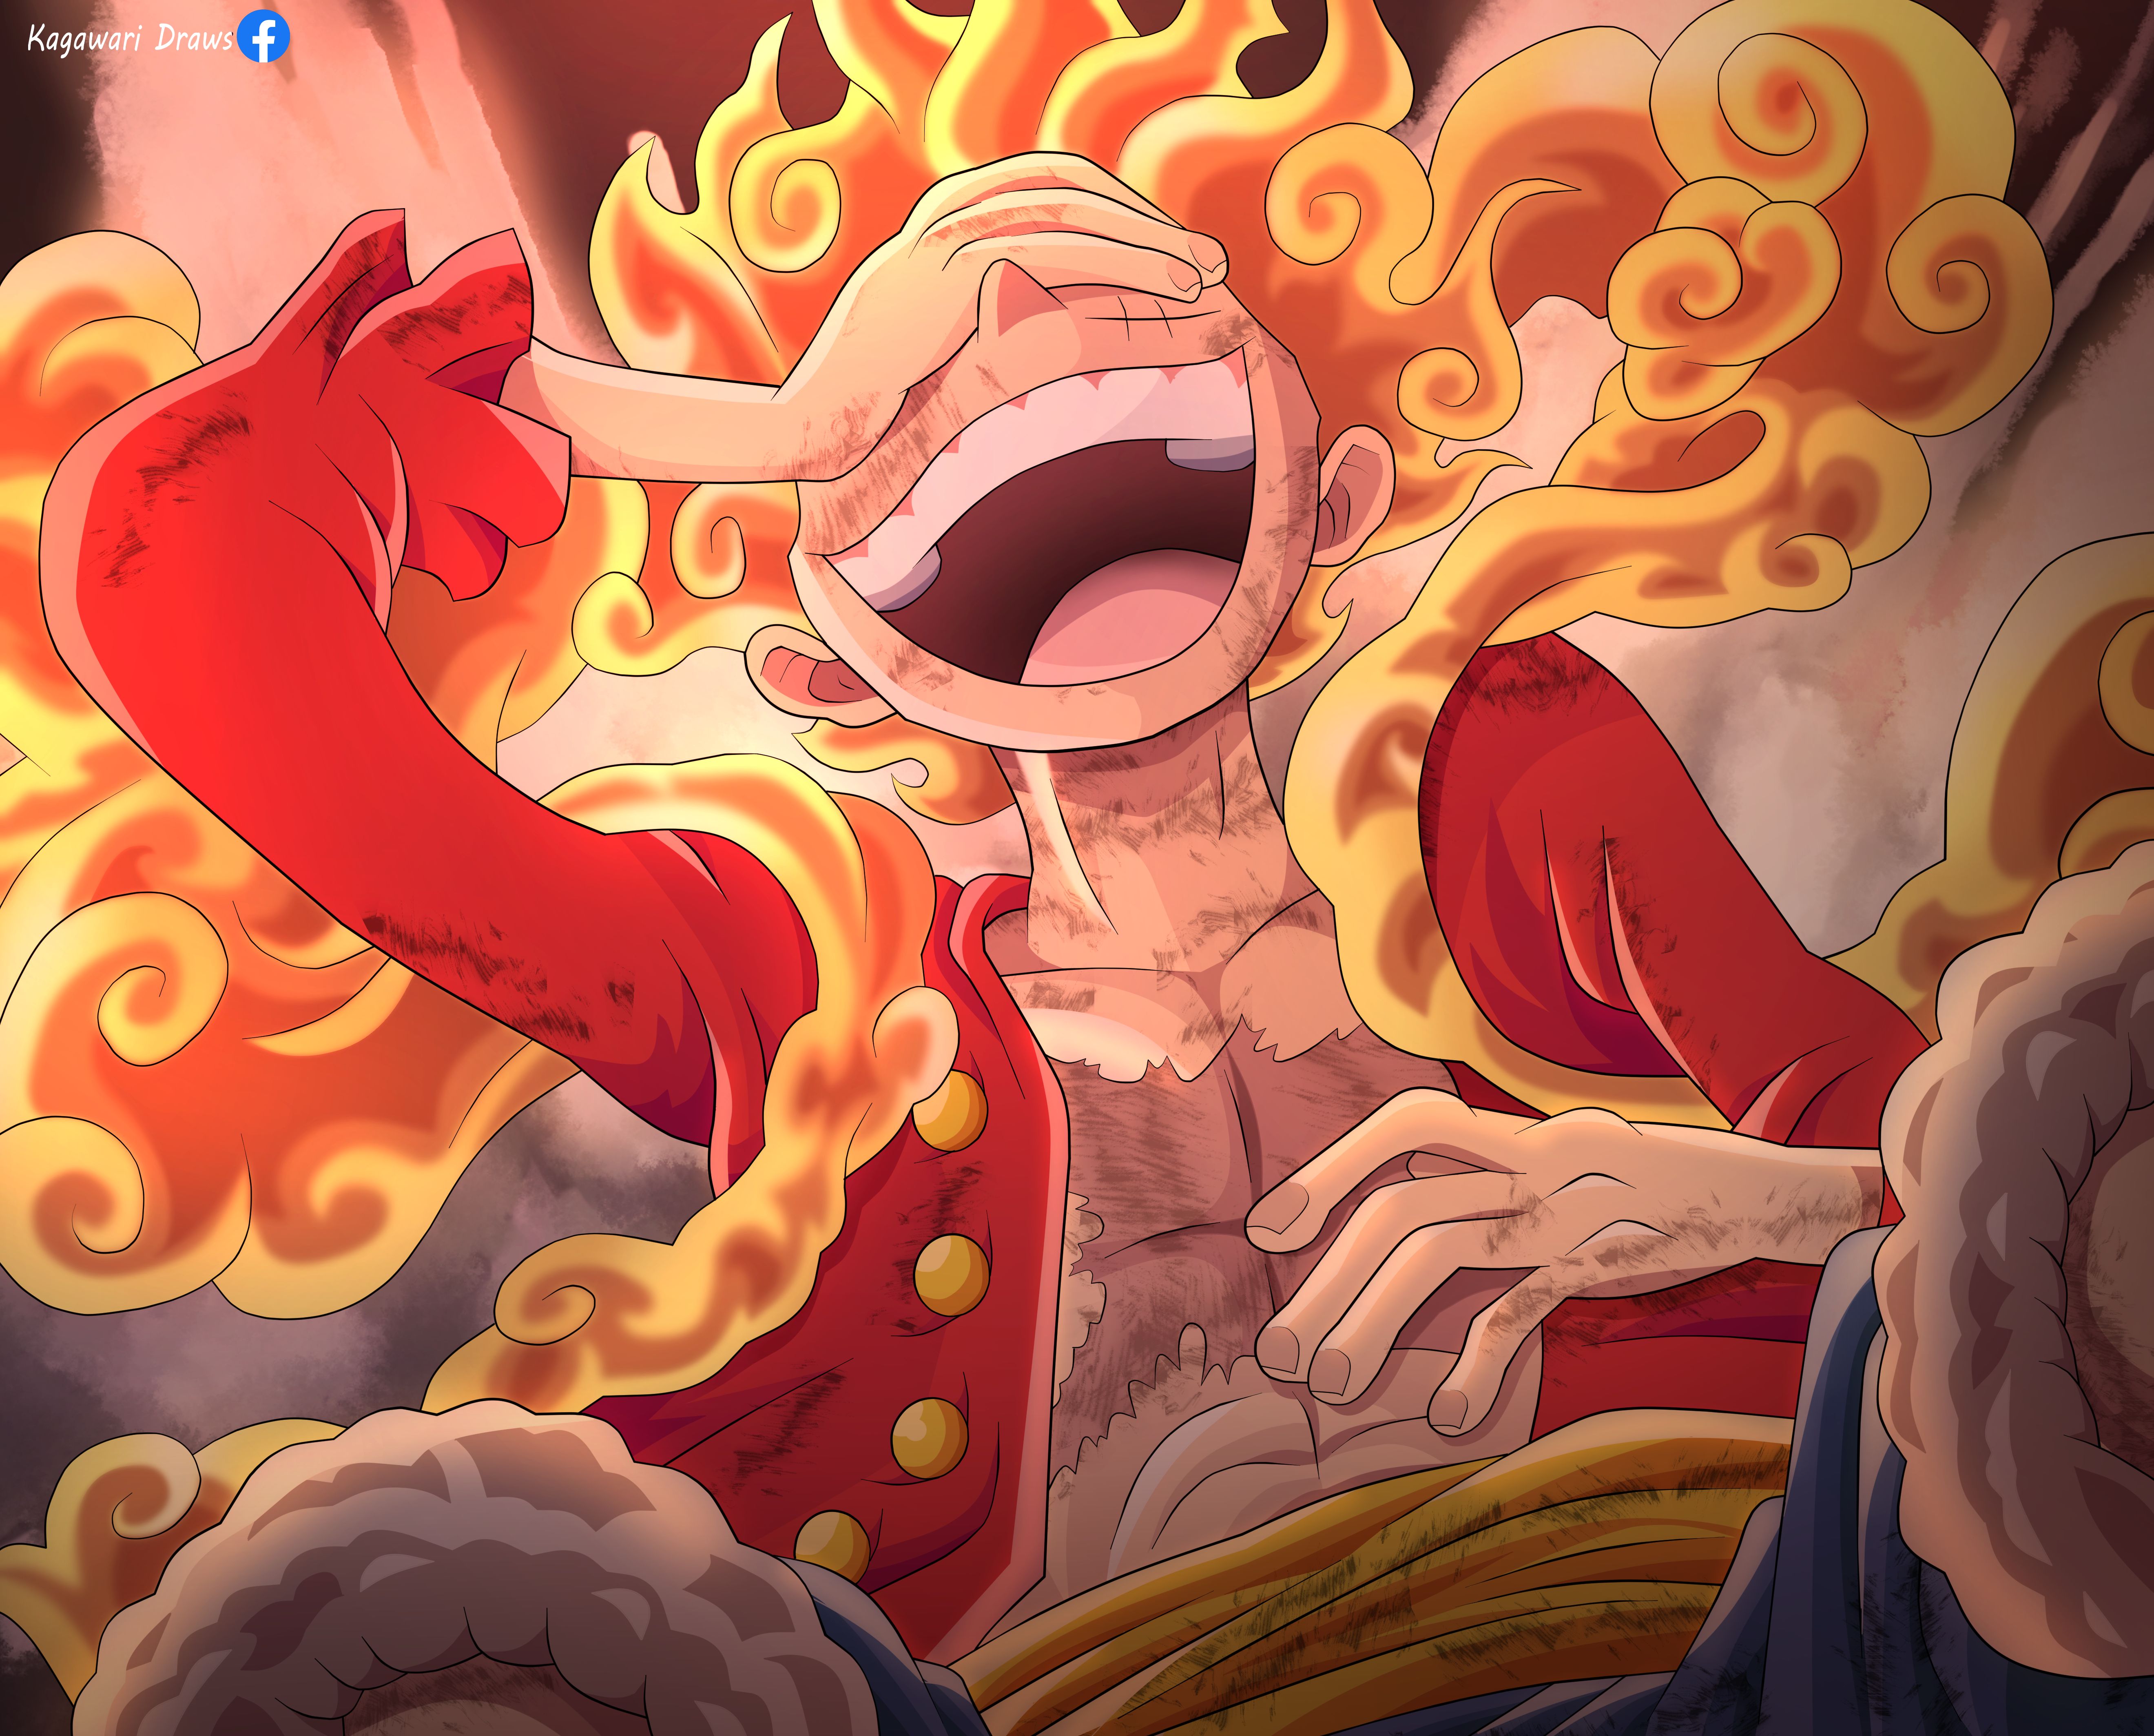 Download Gear 5 (One Piece) wallpaper for mobile phone, free Gear 5 (One Piece) HD picture